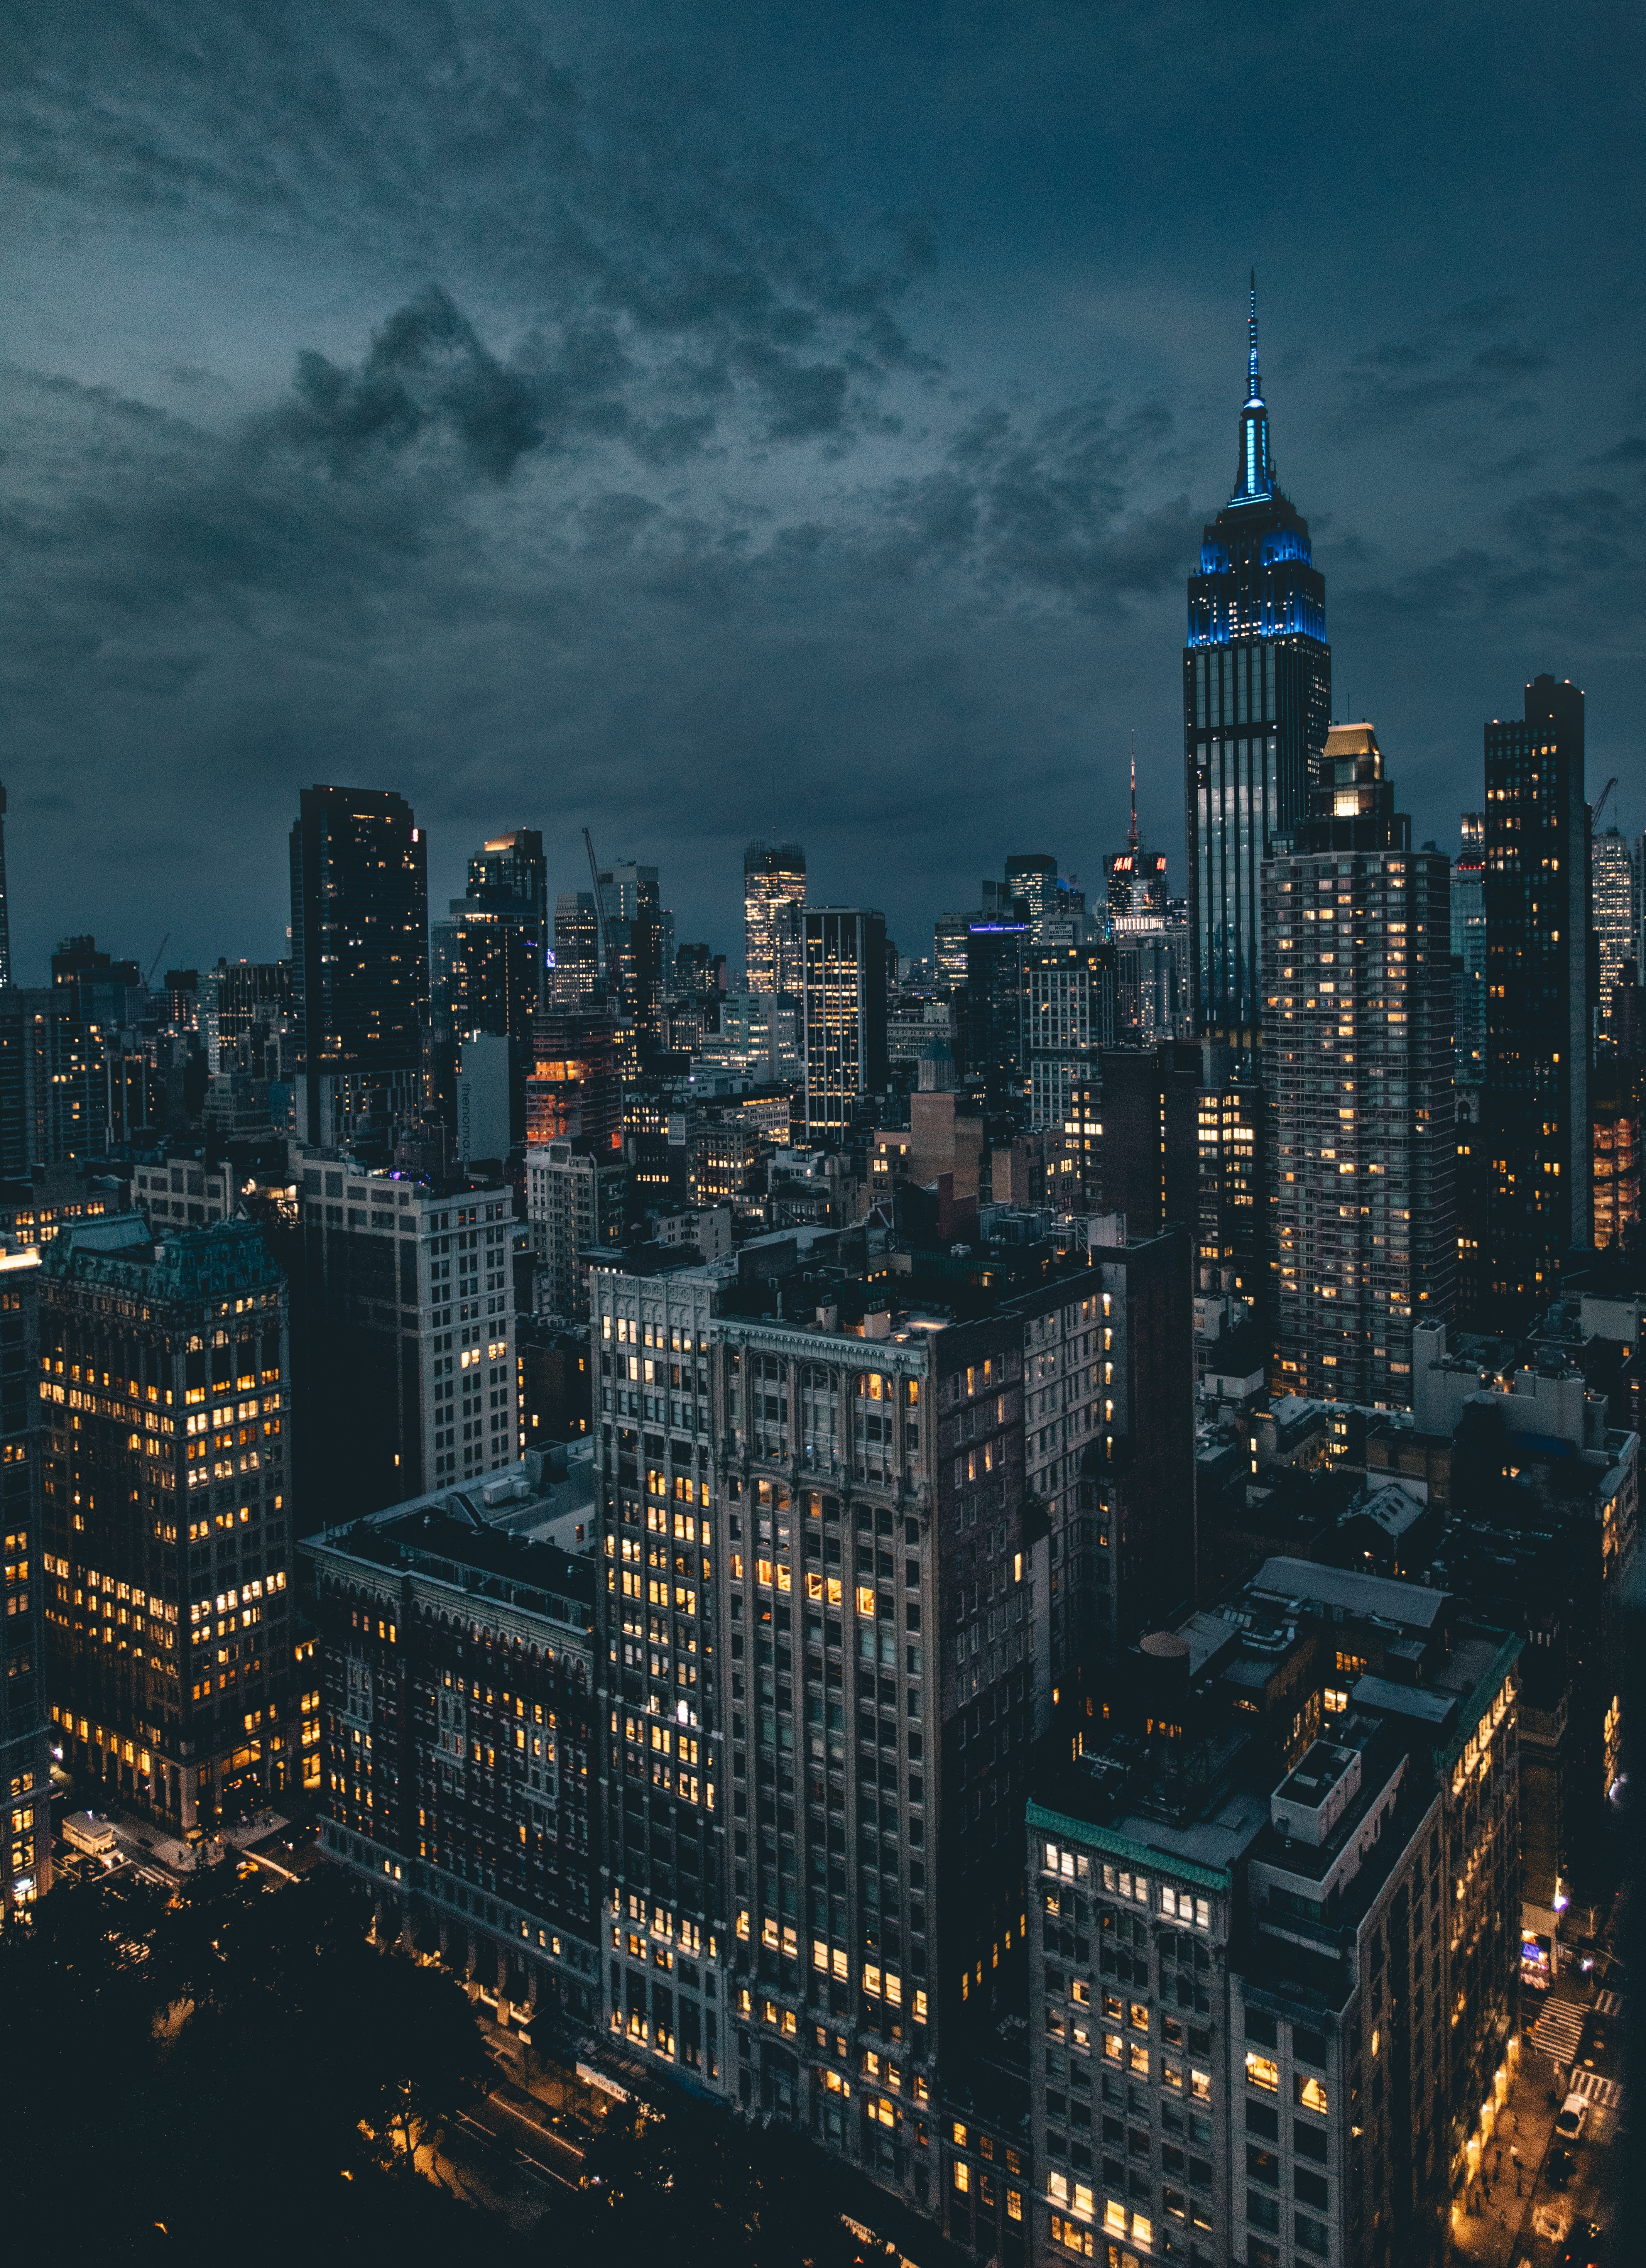 usa, new york, night city, night, cities, clouds, city lights, skyscrapers, united states